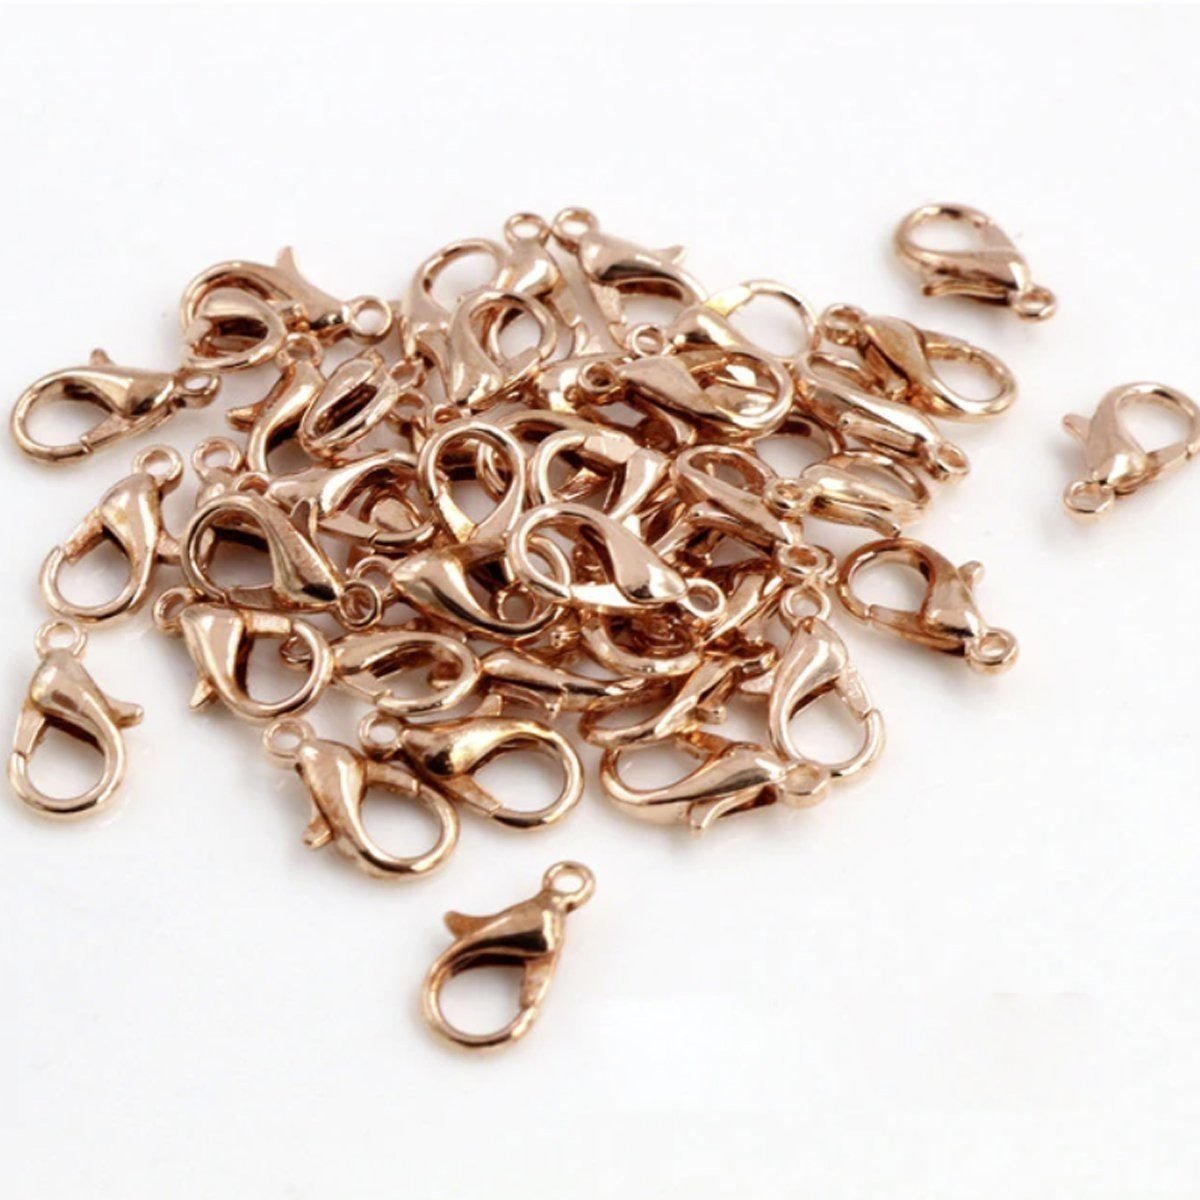 10pcs Plated Fashion Jewellery Alloy Lobster Clasp Hooks for Necklace & Bracelet Chain DIY Making Small Keyring - Rose Gold 10x5mm - - Asia Sell